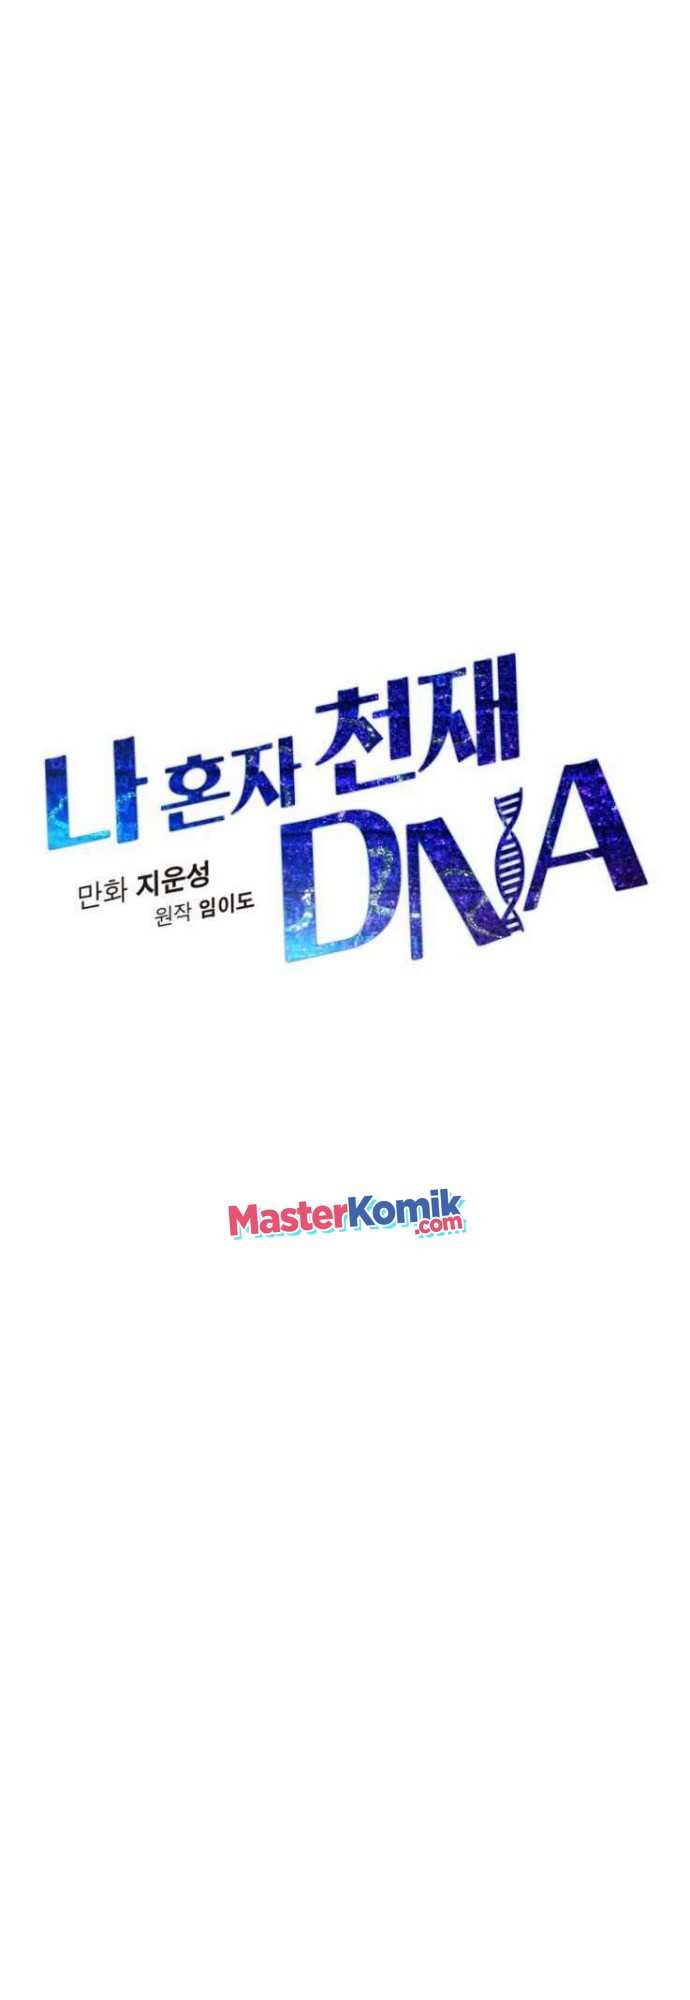 I Am Alone Genius Dna Chapter 57